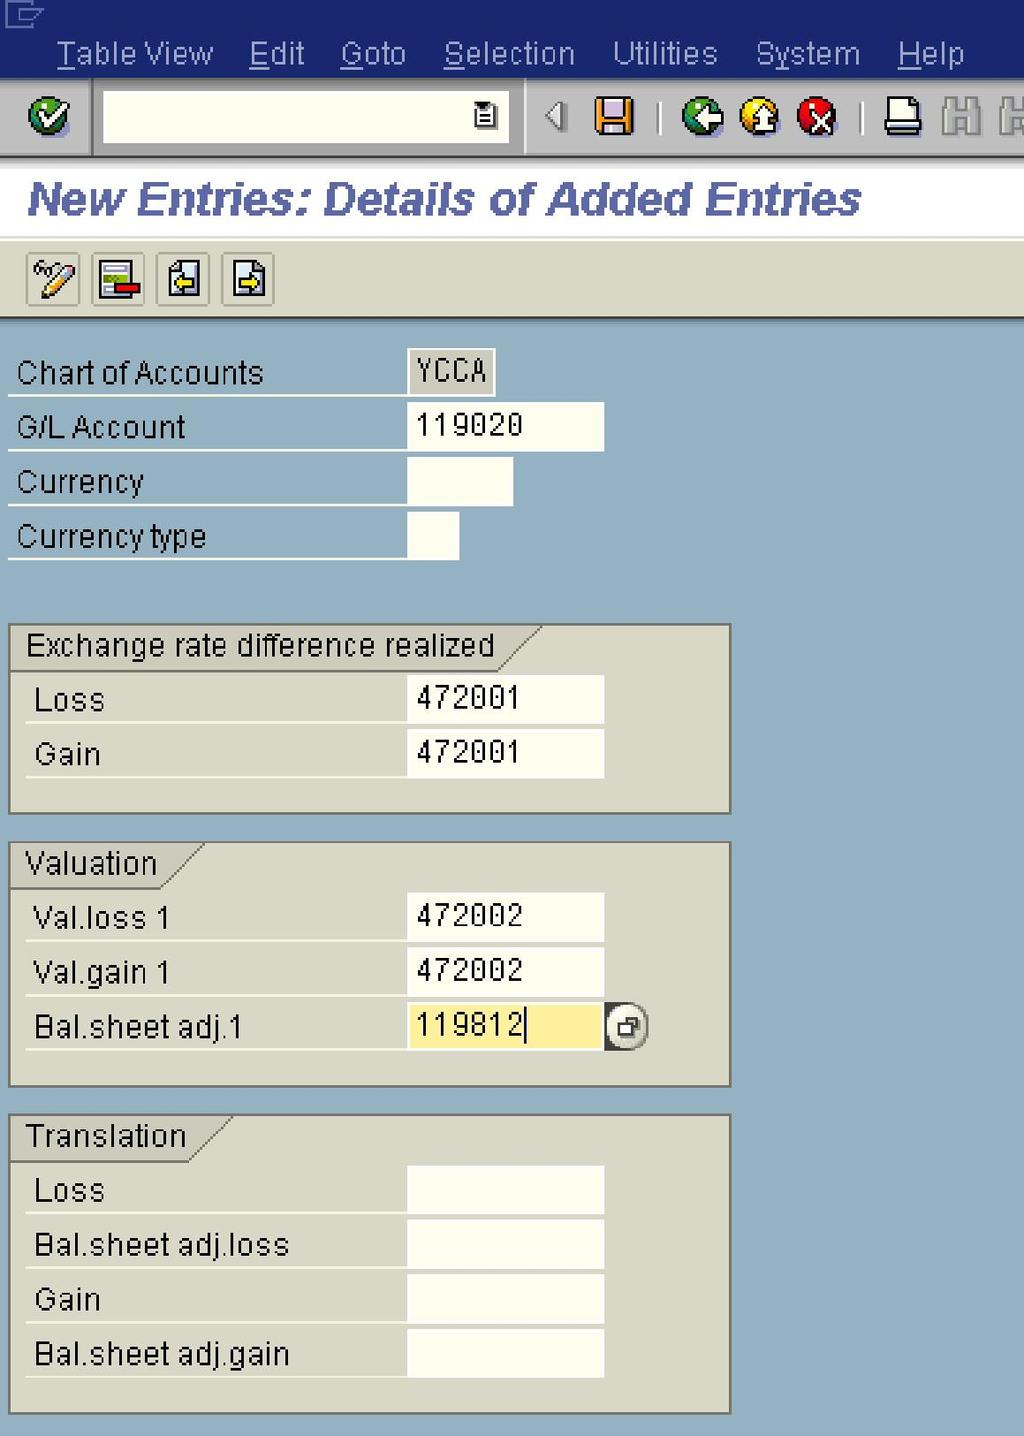 119020 is the GL code for Account Receivables trade 3rd parties Loss: Here you enter the GL code for exchange loss, which is realized Gain: Here you enter the GL code for exchange gain, which is